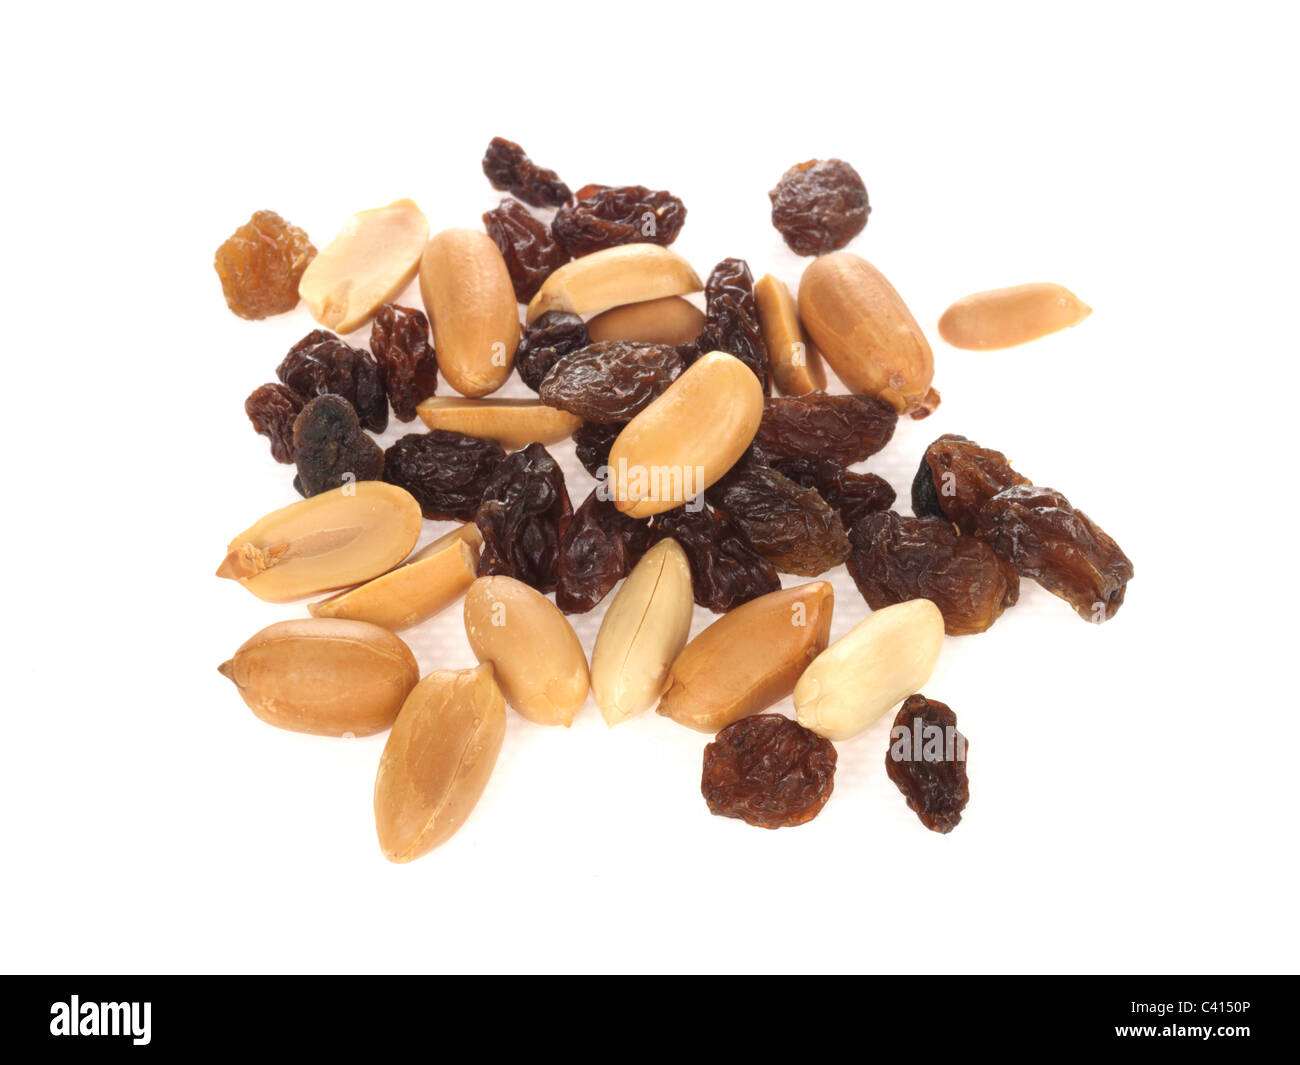 Handful Of Healthy Dried Fruit and Nuts Against A White Background With No People With copy Space Or A Clipping Path Stock Photo